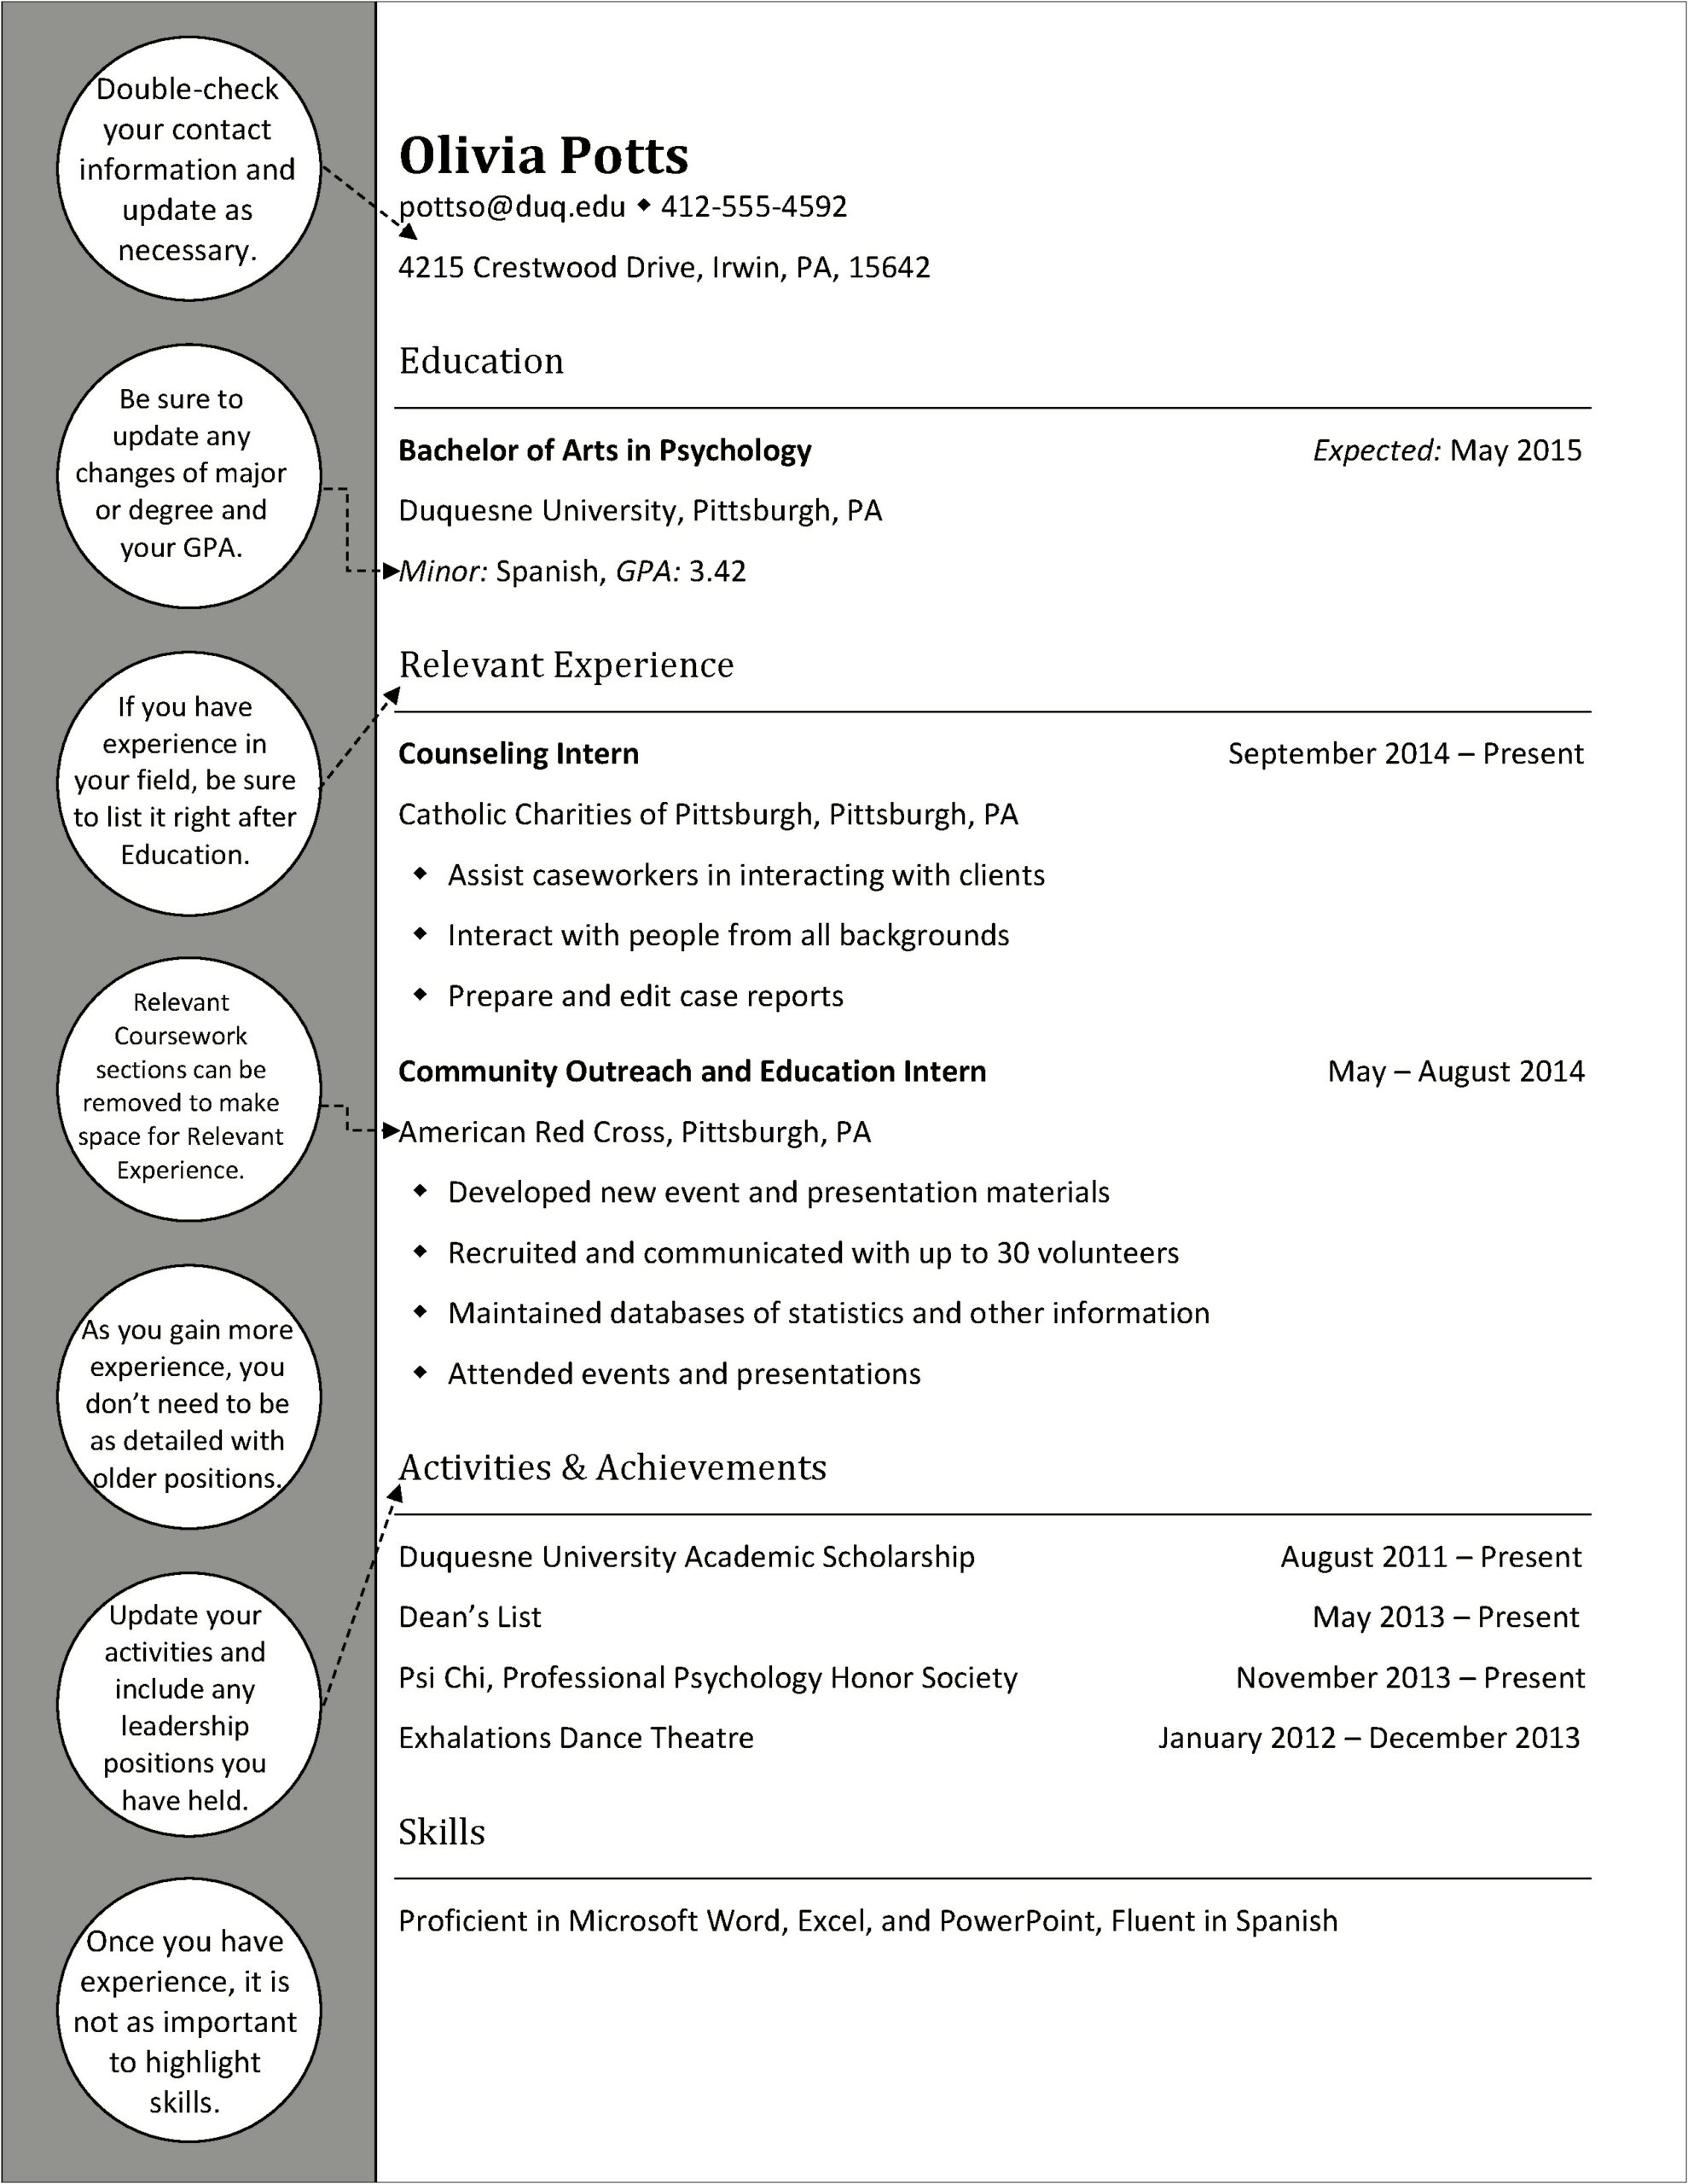 Resume Objective Examples For Psychology Majors